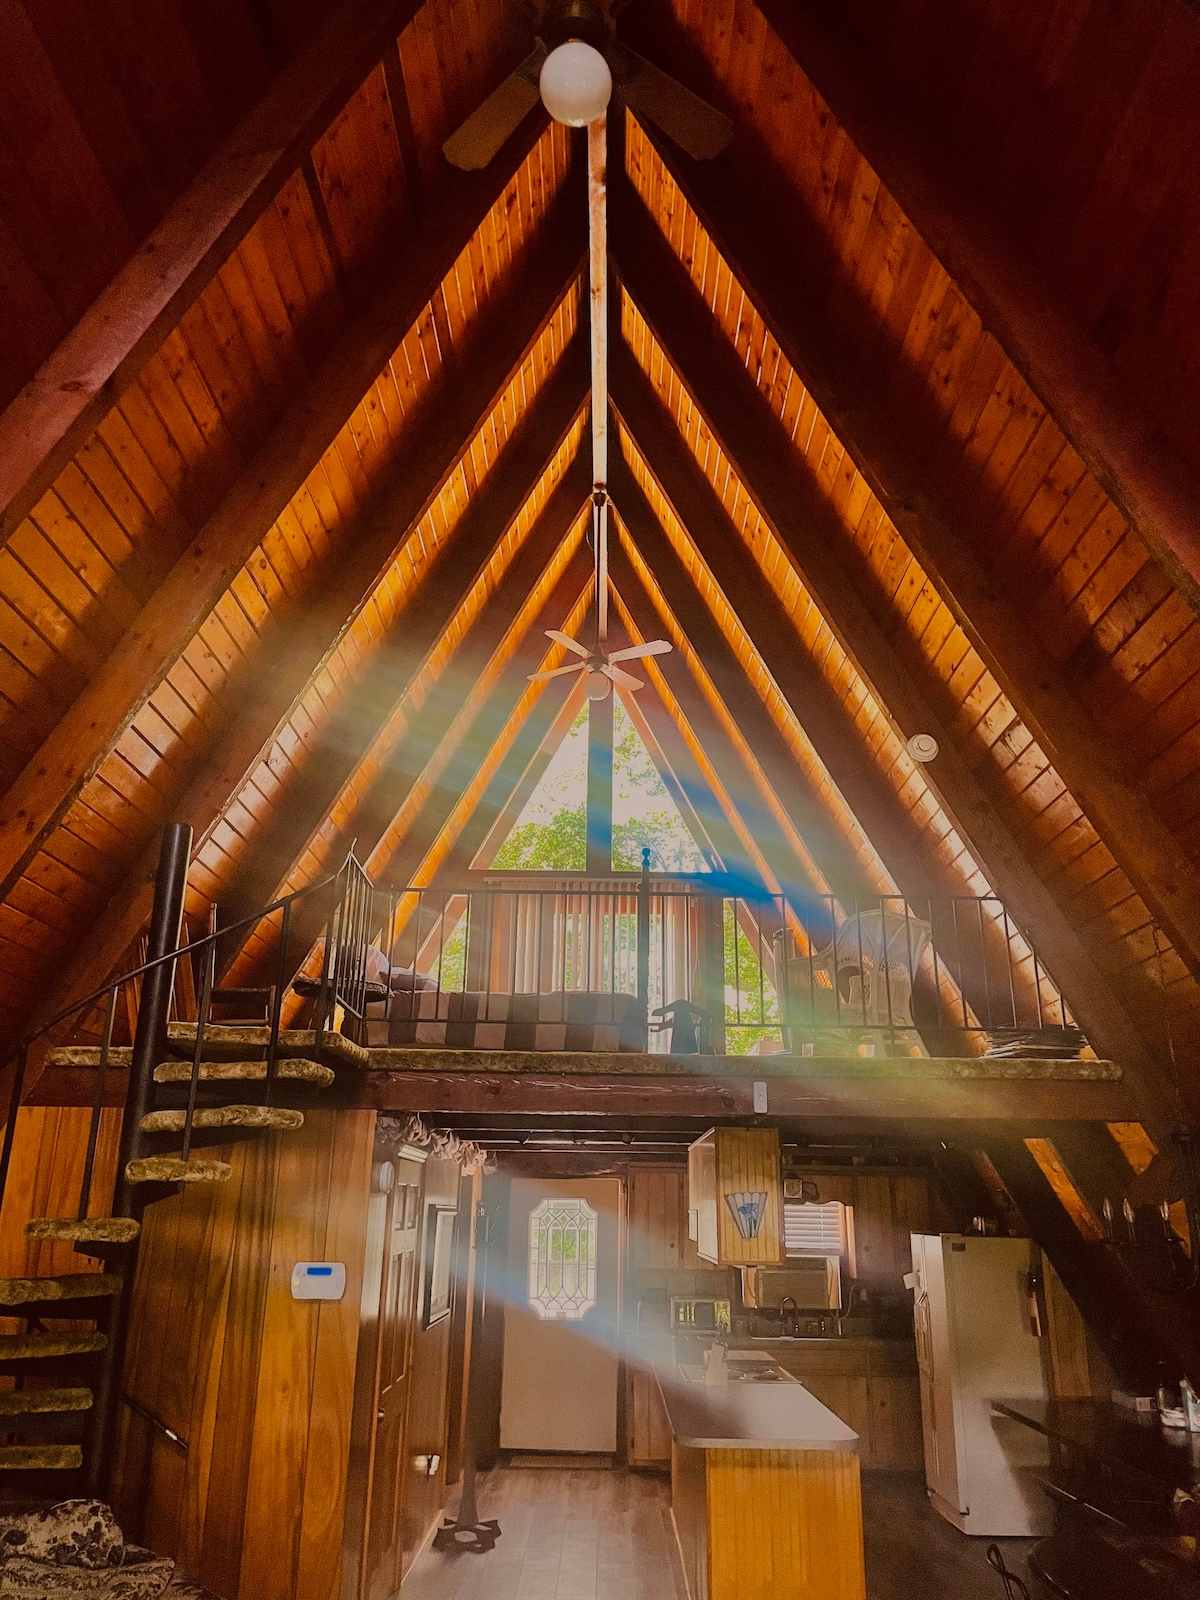 The A-Frame Chalet of the Blueridge Mountains